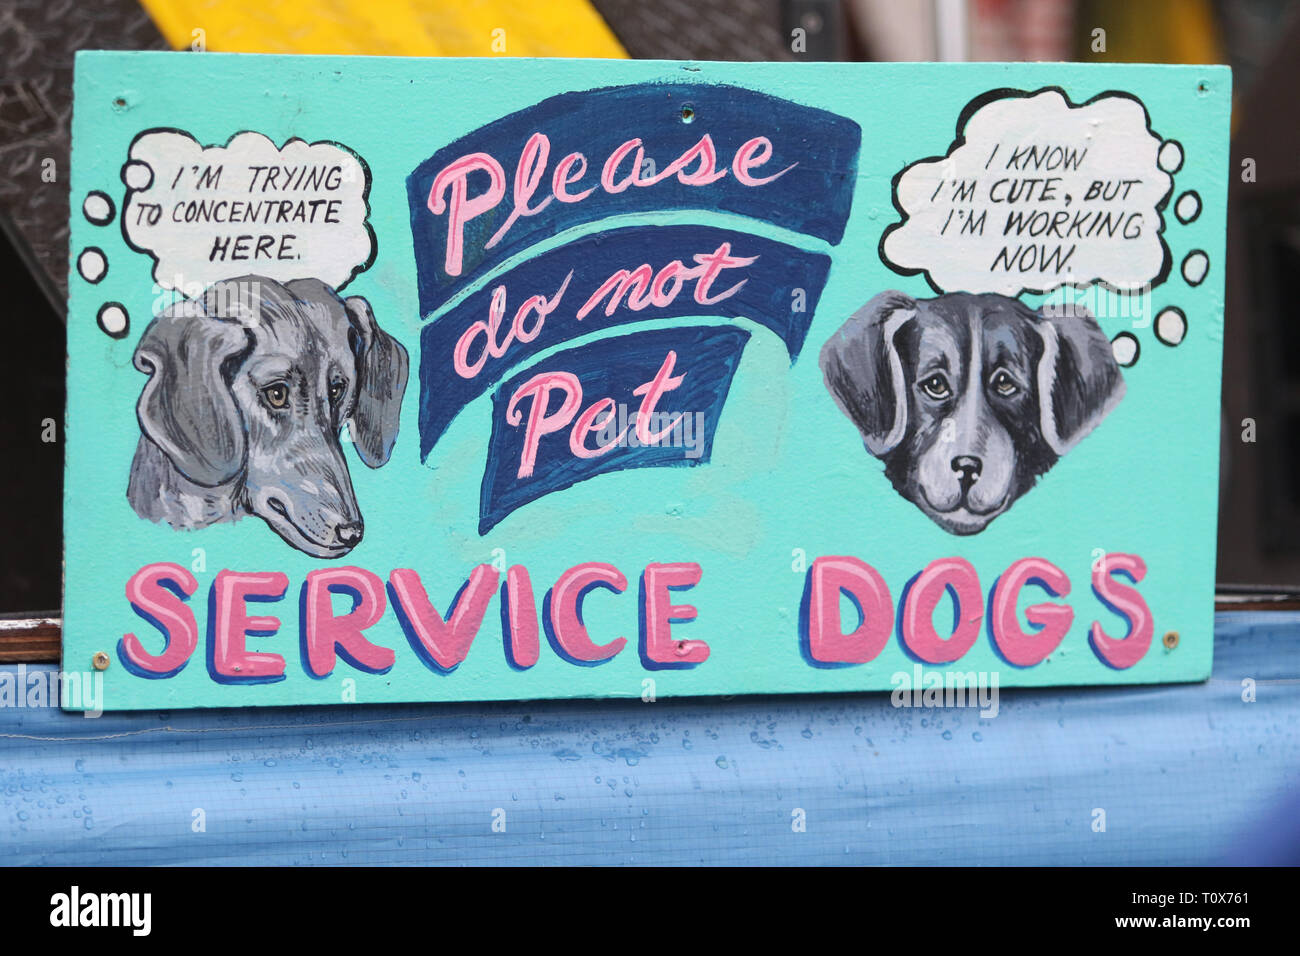 'Please Do Not Pet the Service Dogs' sign is shown on display at an outdoor music festival. Stock Photo